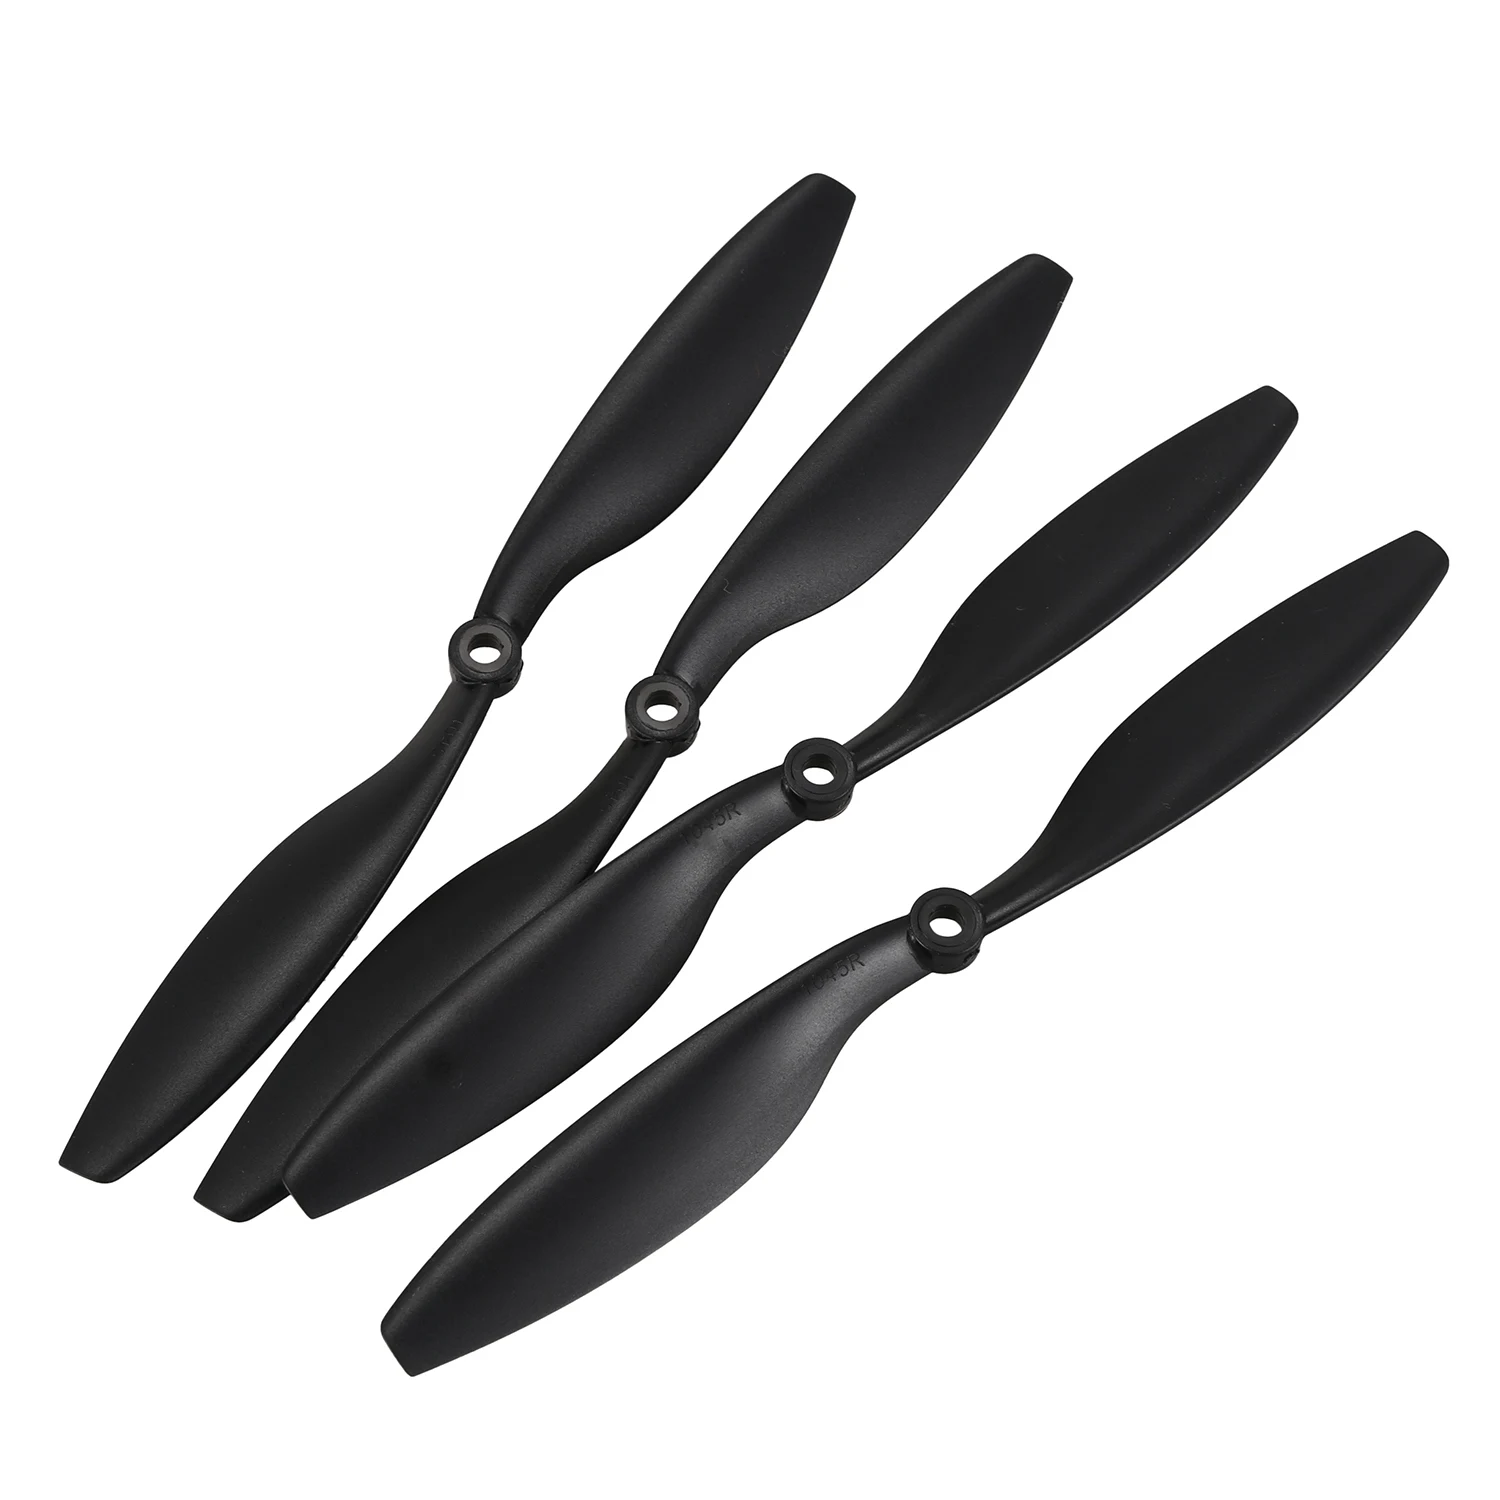 

4x 1045 10 inch Dia 4.5 inch Pitch CW/CCW Rotating Propeller blades RC Quadcopter Prop